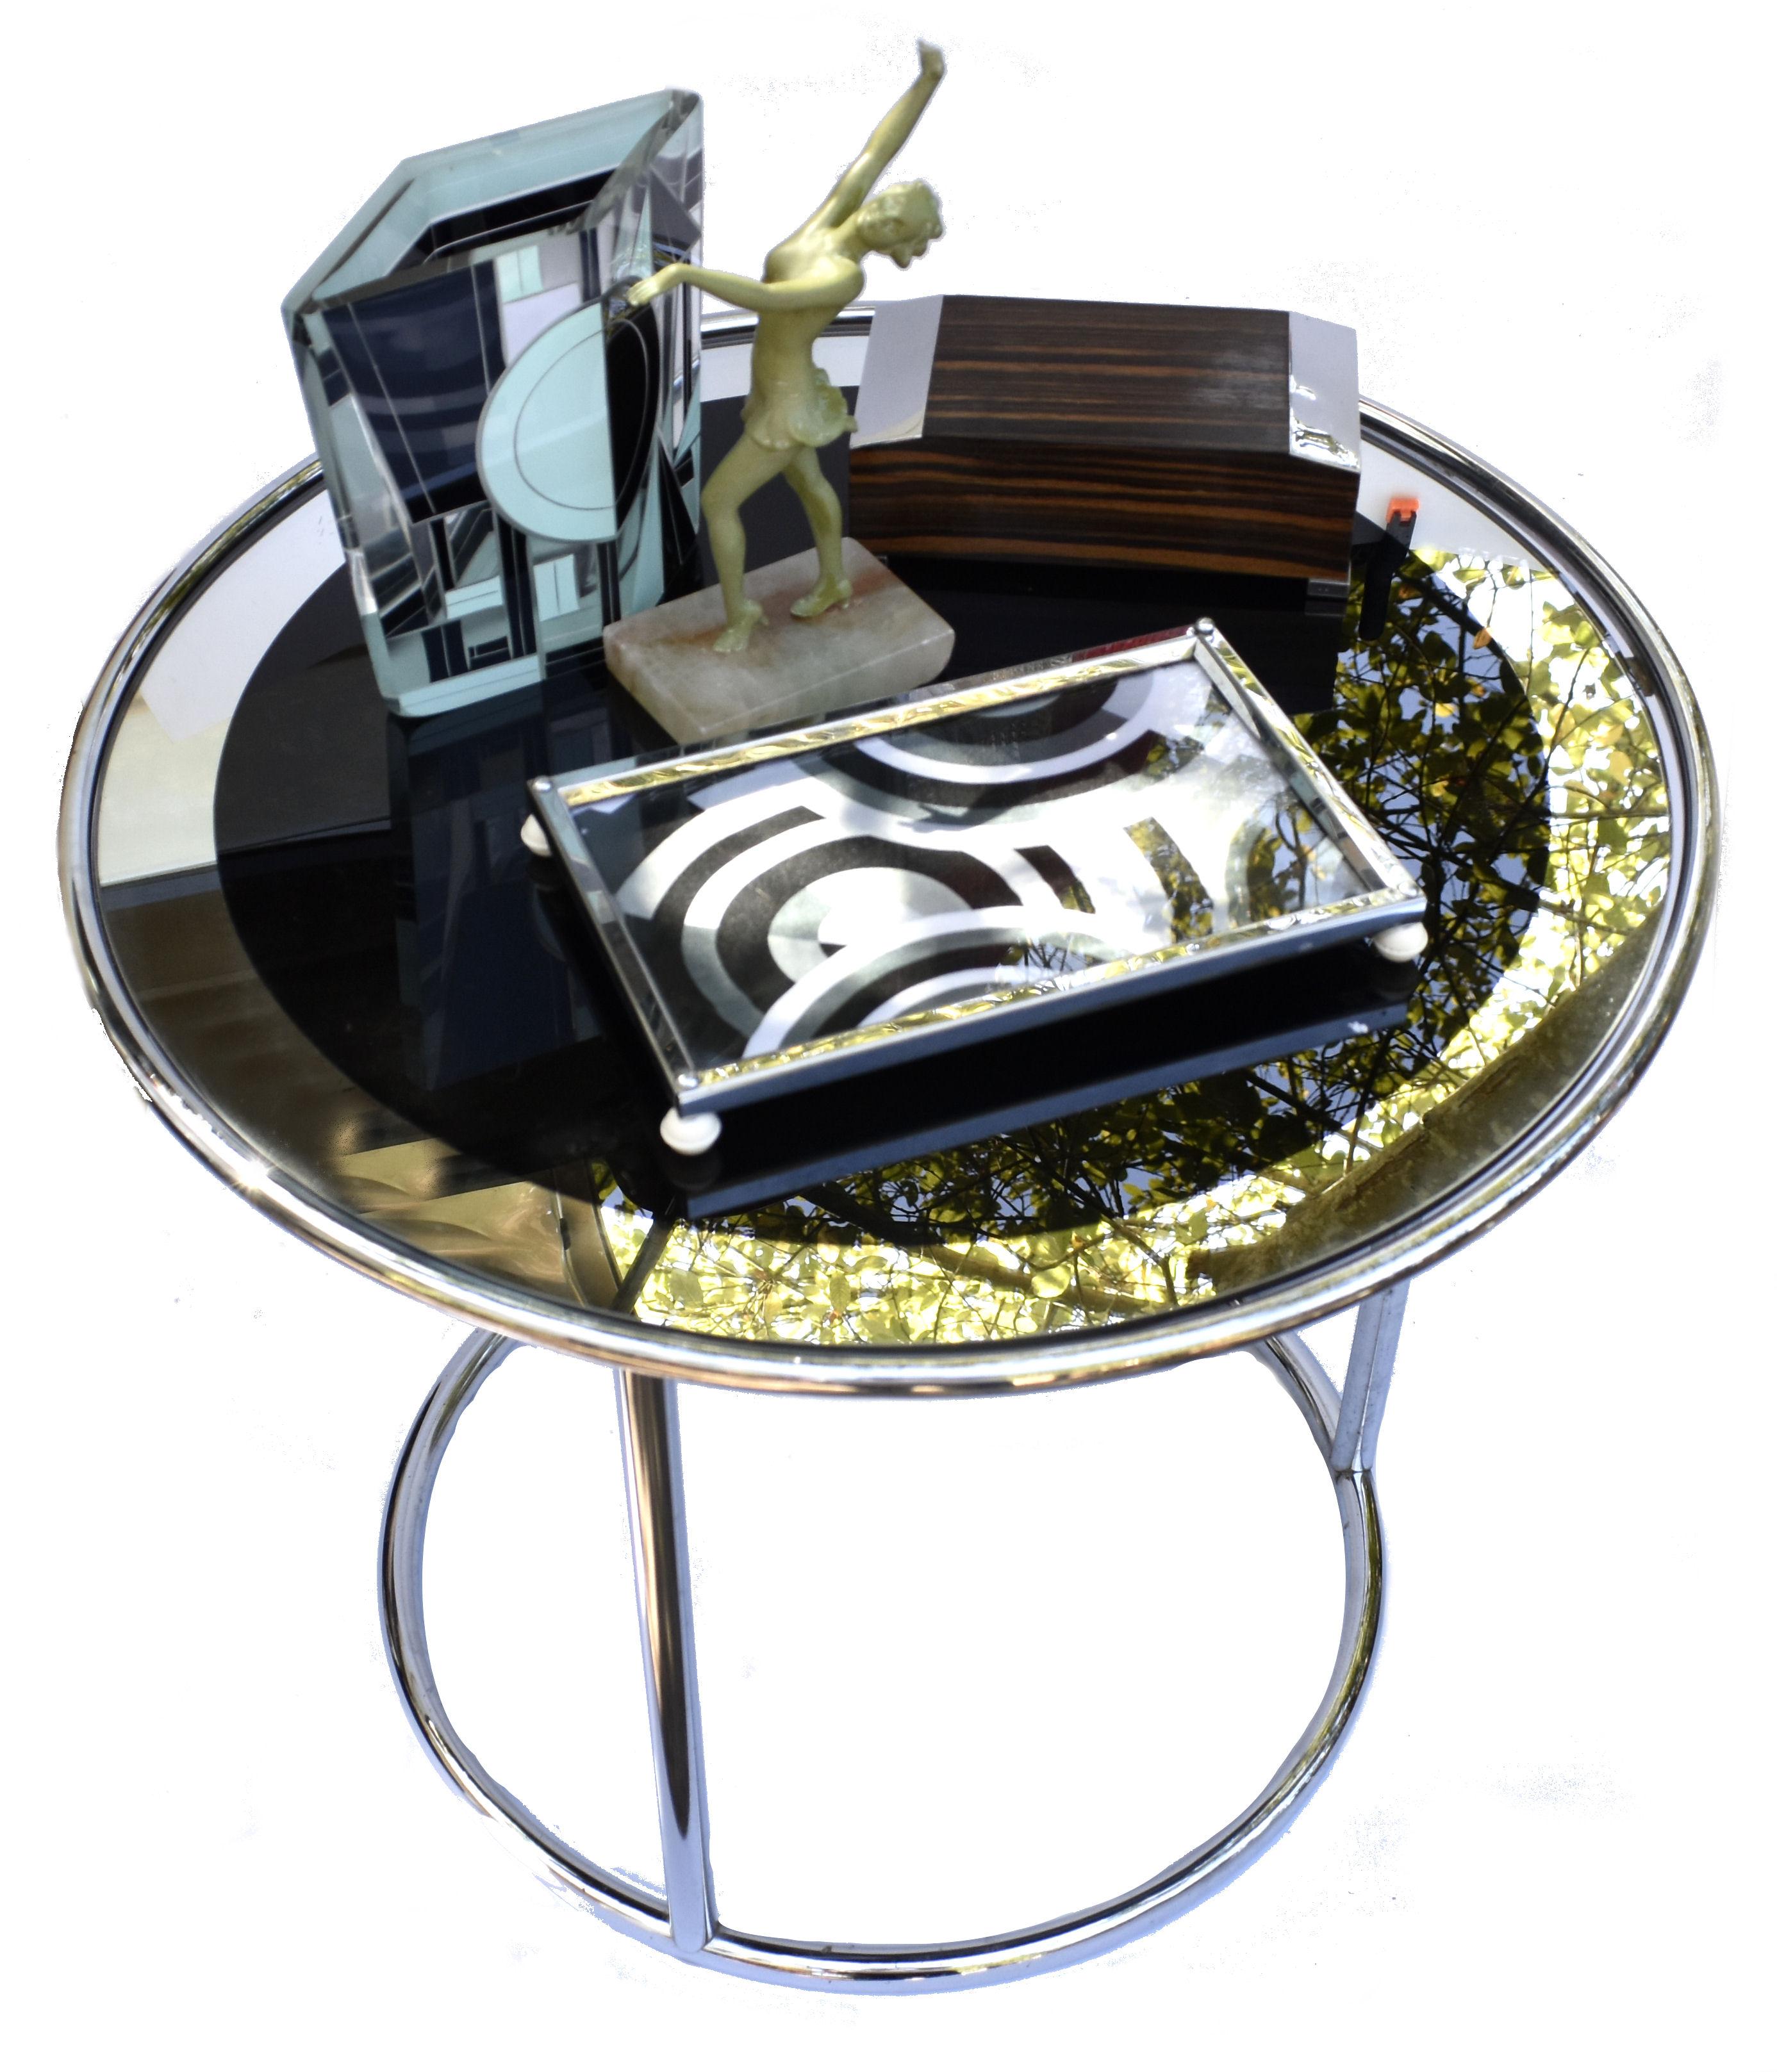 Art Deco Chrome & Glass Modernist Occasional Cocktail Table, English, C1930's For Sale 5